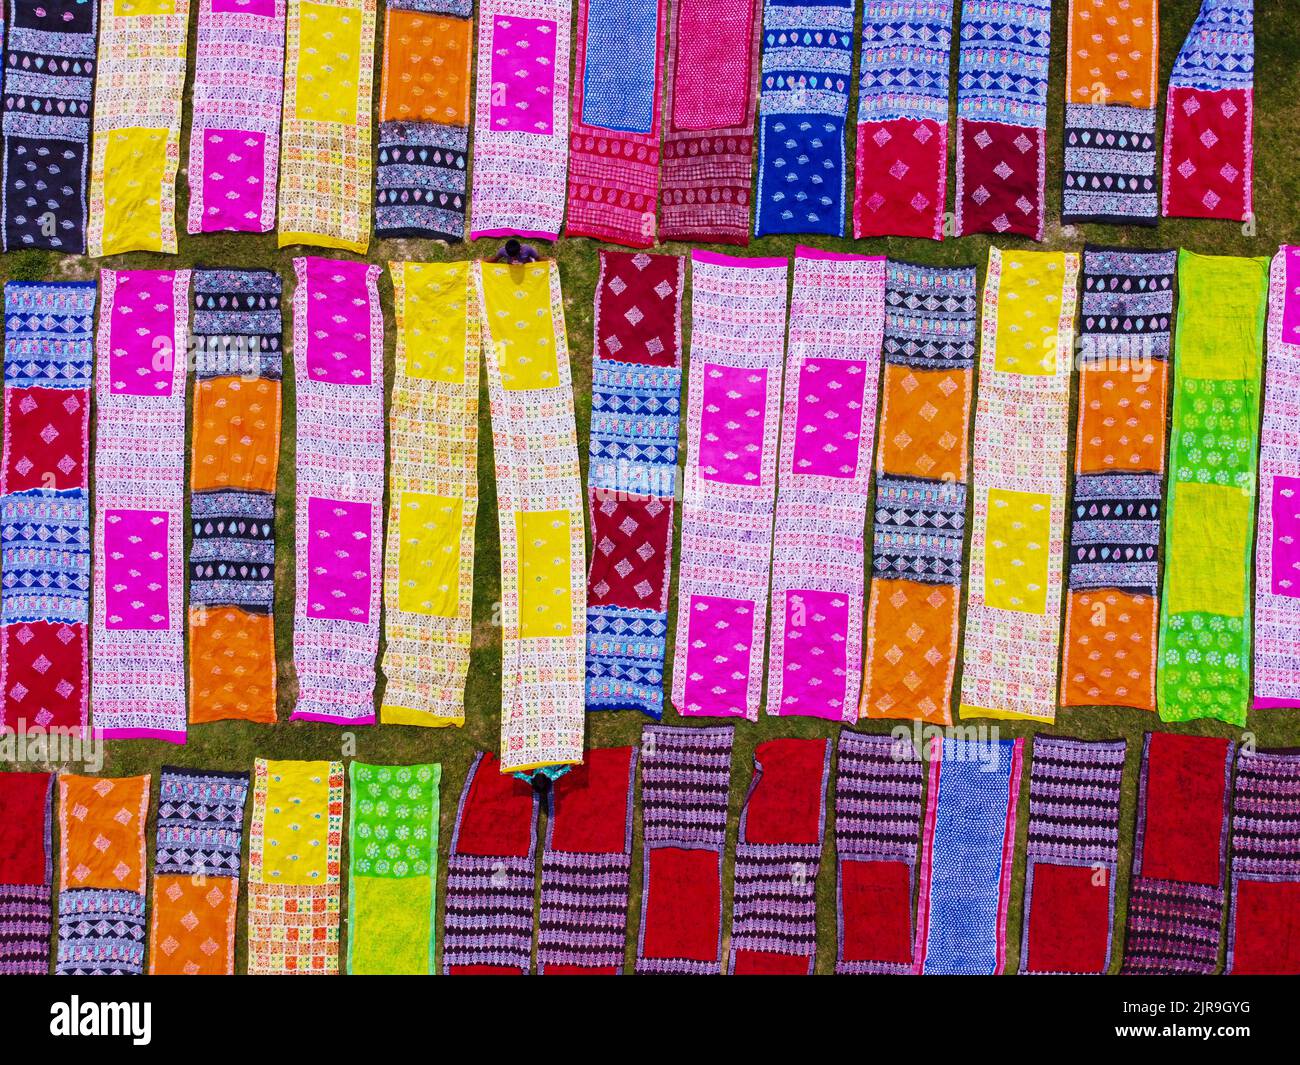 Narayanganj, Dhaka, Bangladesh. 23rd Aug, 2022. Colorful strips of fabric produce an eye-catching display as they are laid out in neat rows across a field in Narayanganj, Bangladesh. Locally called ''Saree'' - a traditional clothing garment for women, the long cotton cloths are set out to dry under the hot sun, having been dyed with bright colours. About 4000 pieces of cloth are laid to dry here everyday. The process usually takes three hours, with each set of 200 pieces at a time to dry in temperatures that can reach over 36 degrees celsius. Credit: ZUMA Press, Inc./Alamy Live News Stock Photo